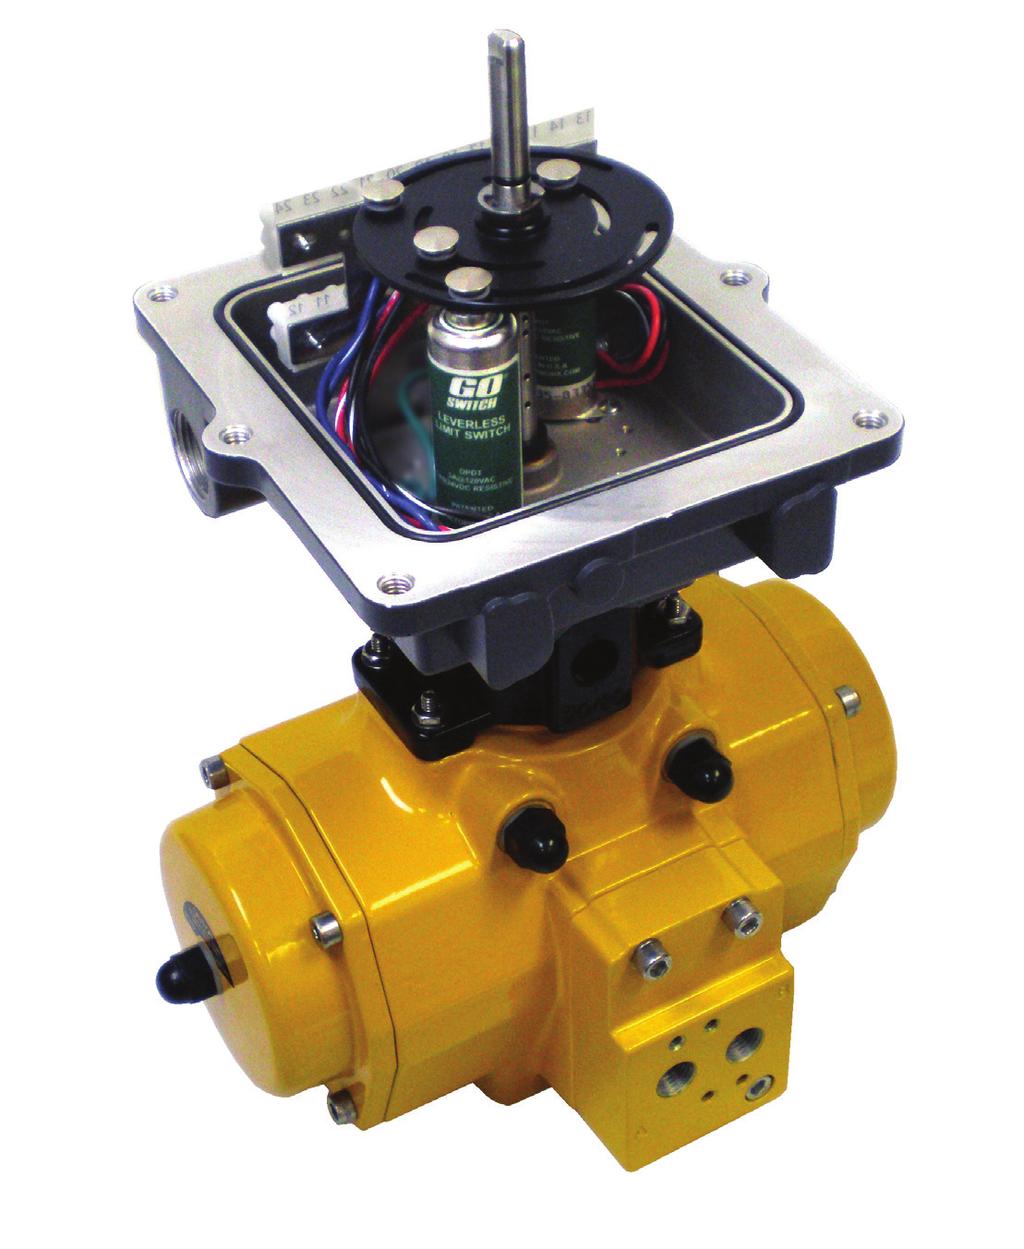 GO SWITCH SPECIALTY SENSORS Sensing Solutions for Process and Factory Automation DISCRETE VALVE CONTROL SENSORS 35 Series GO Switches have set the standard for reliable performance in valve monitors.